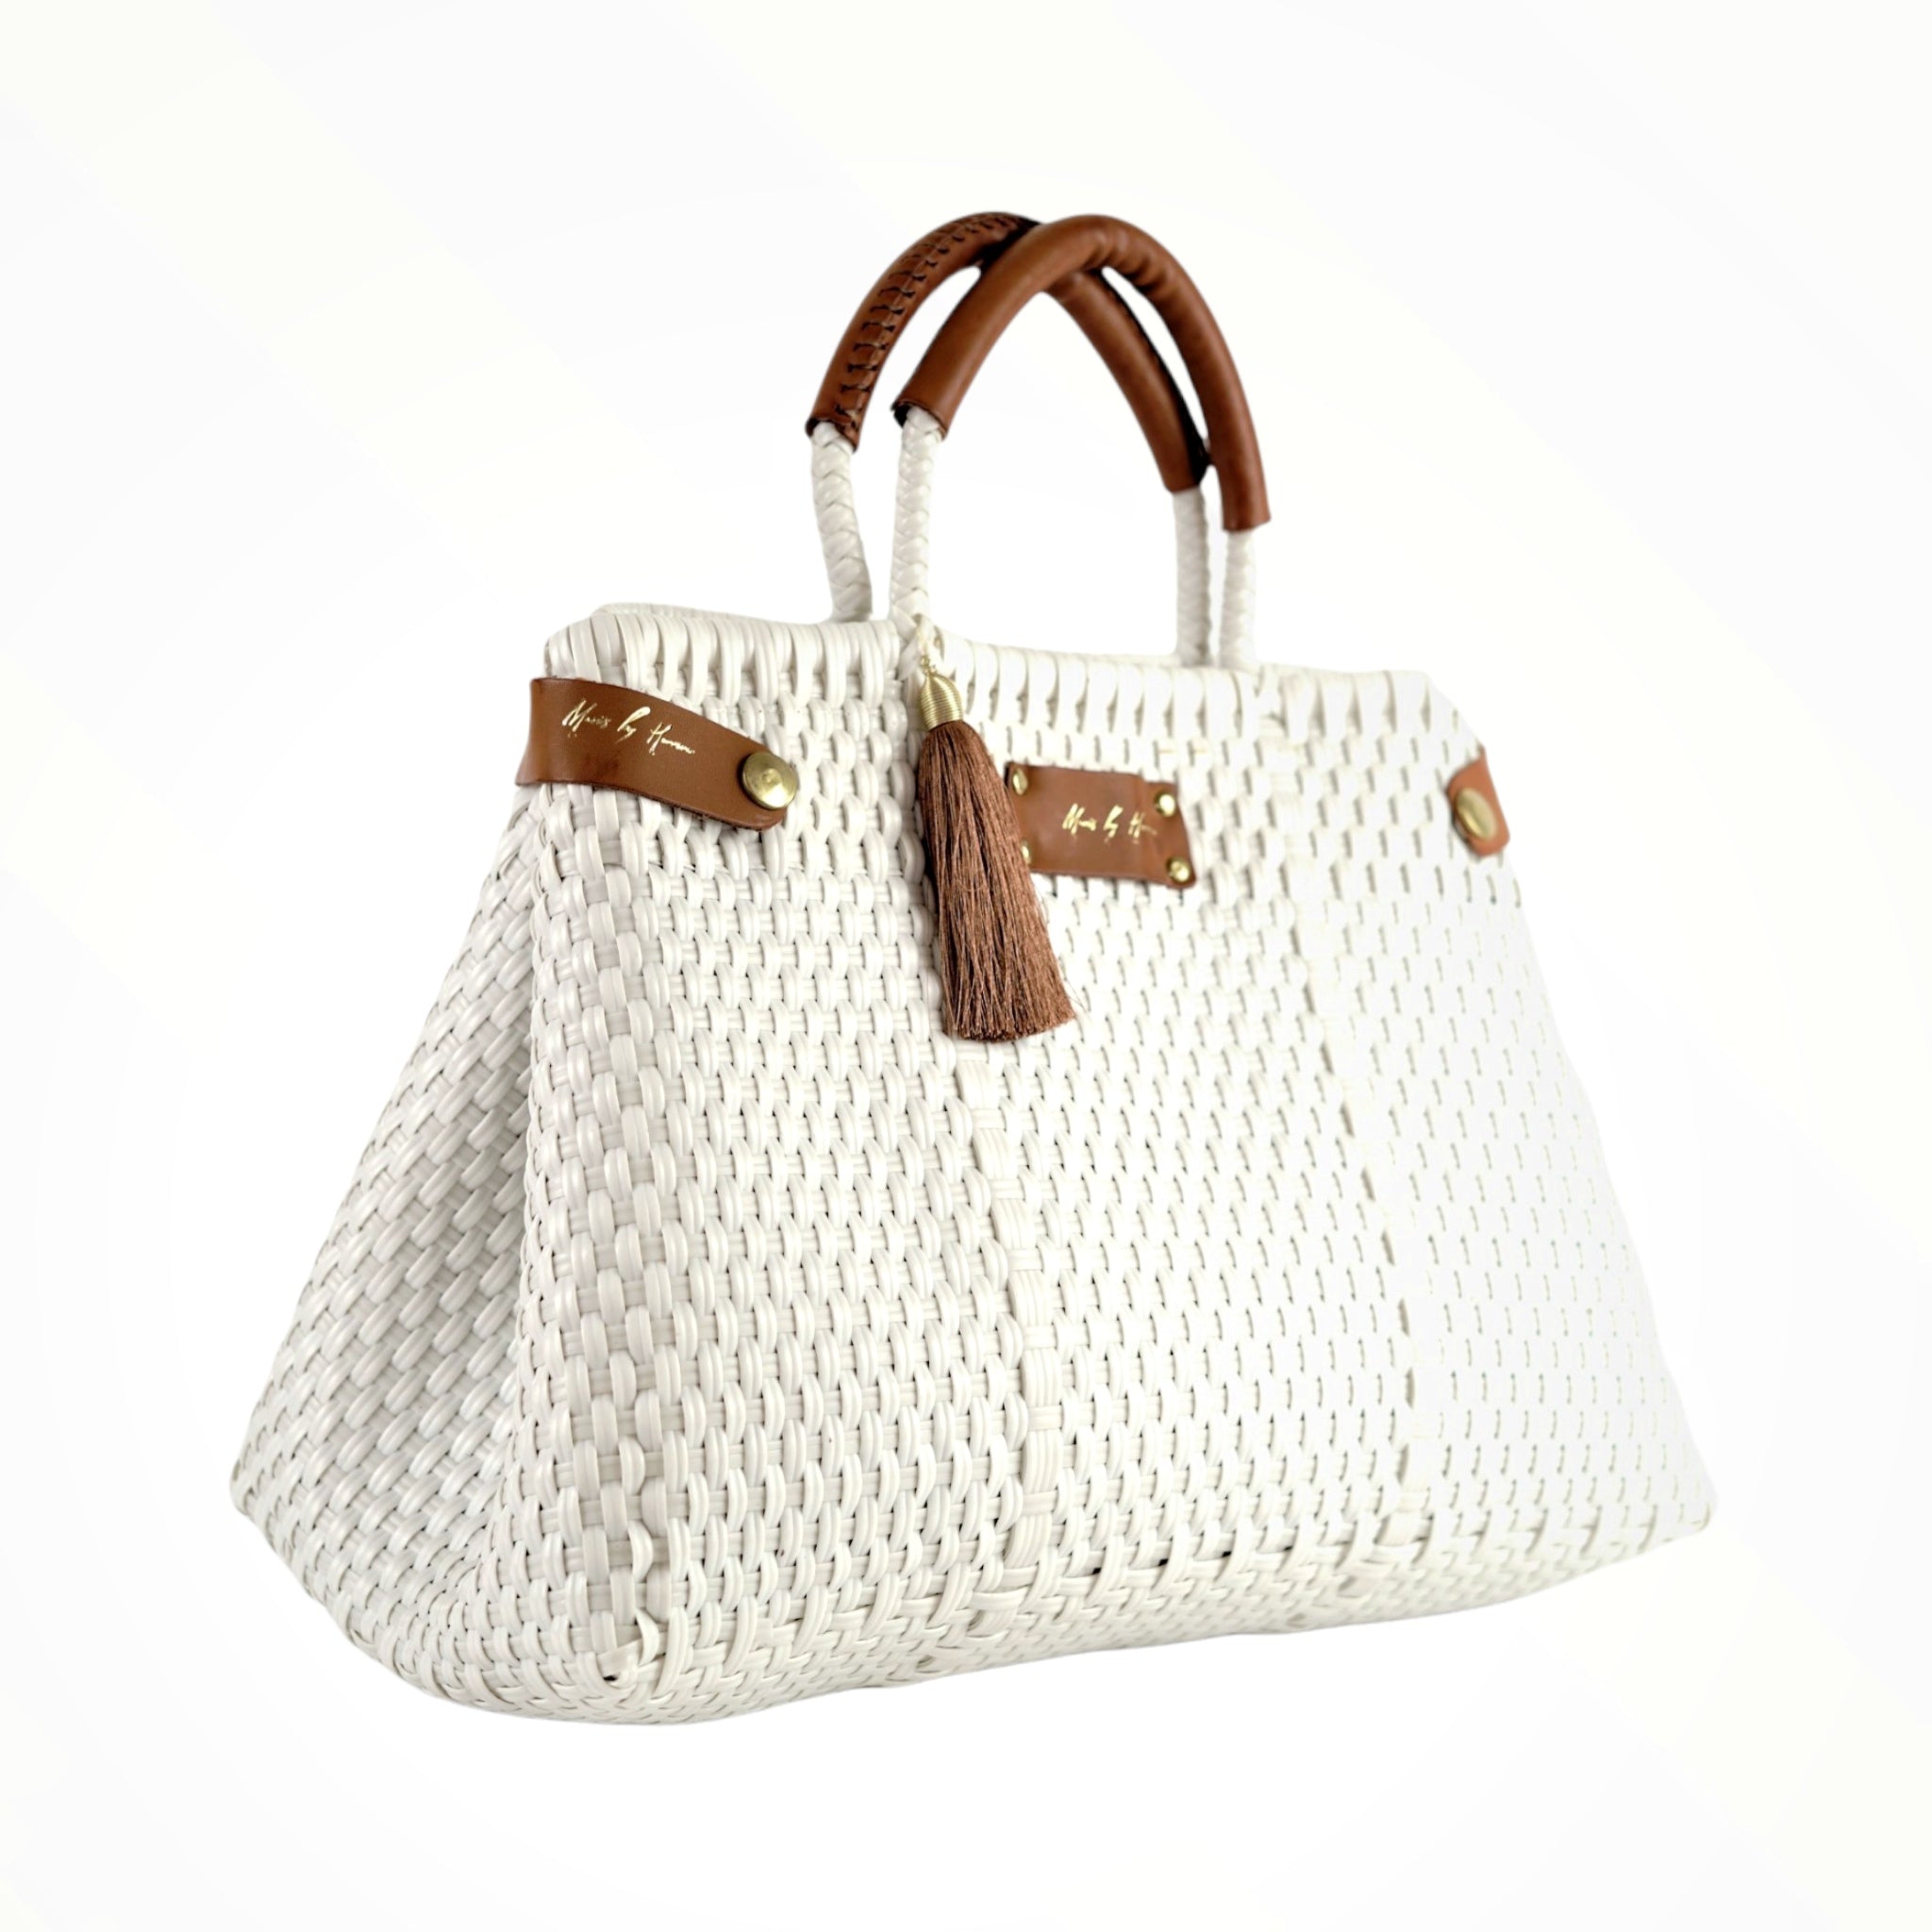 Shop our collection of White Handbags. Fashion Designer Mavis by Herrera. Shop Online . Handmade Recycled materials. Purposefully Unmatched. Quality Materials. Free Shipping. Free Exchanges.  Pay with Klarna.